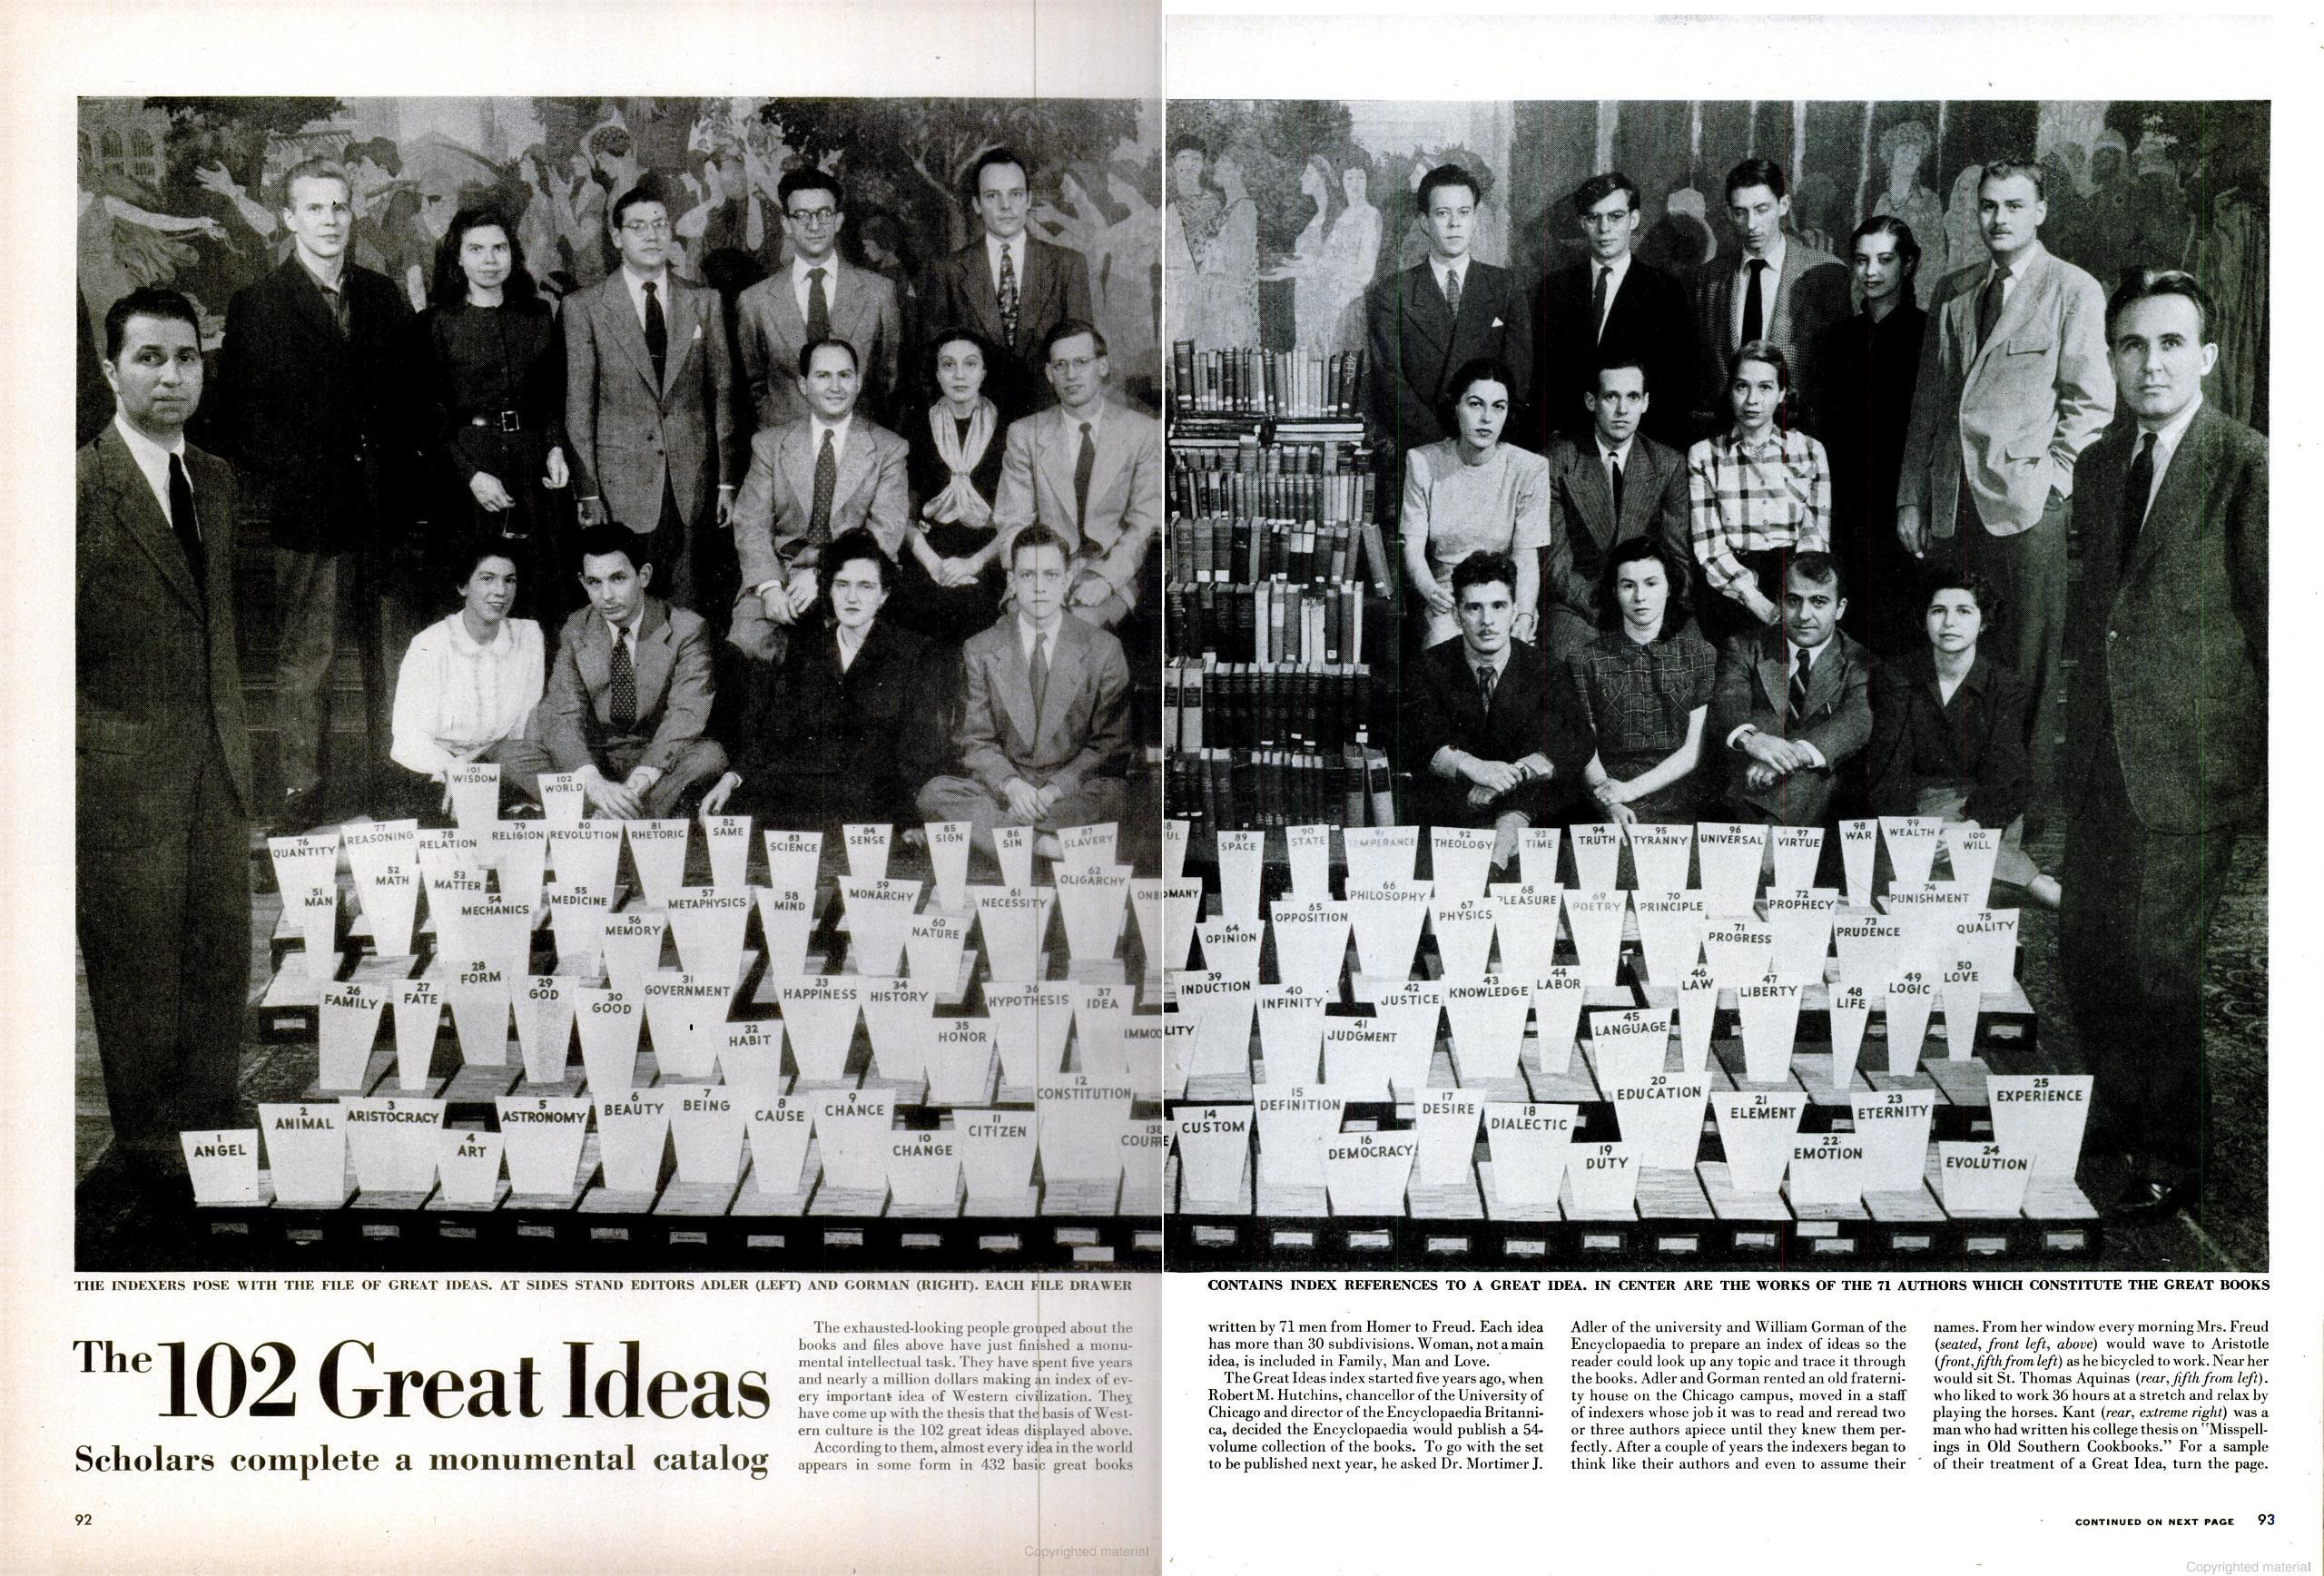 Two page spread of Life Magazine article with the title "The 102 Great Ideas" featuring a photo of 26 people behind 102 card indexes with categorized topical labels from Angel to Will.